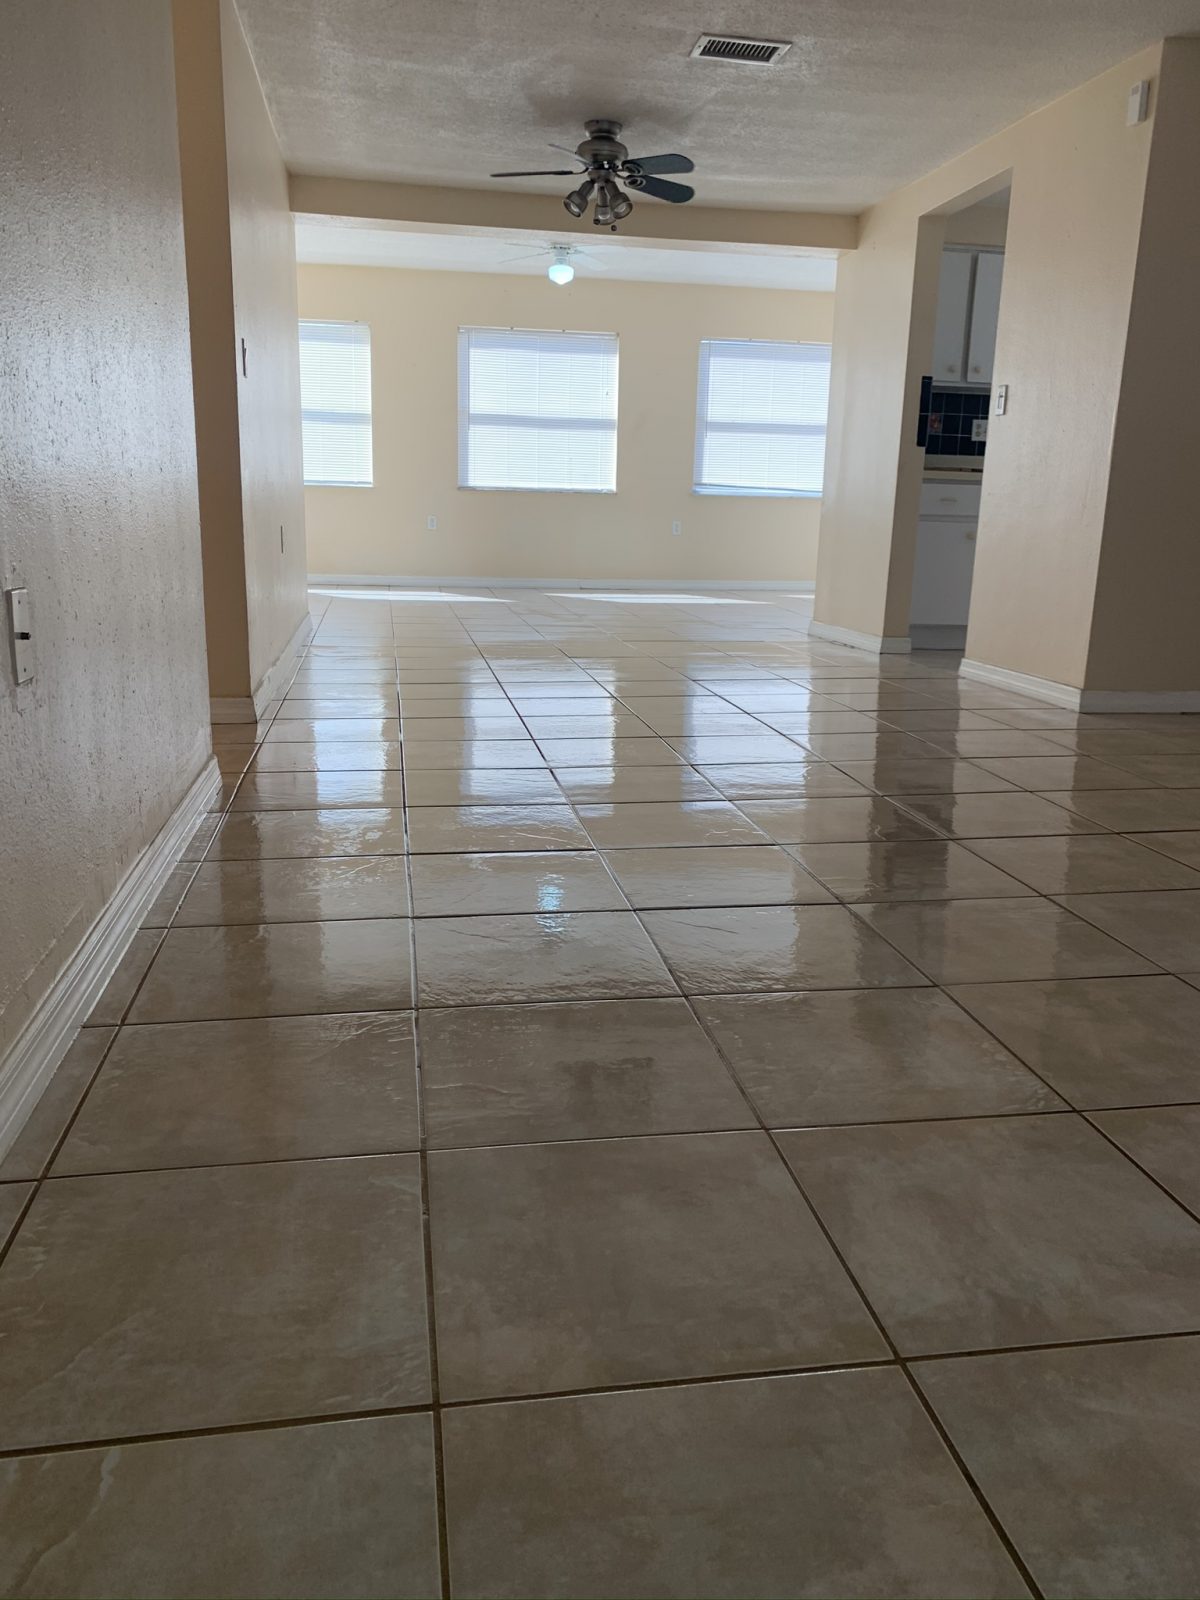 Professional Tile and Grout Cleaning Image New Port Richey Sample 2